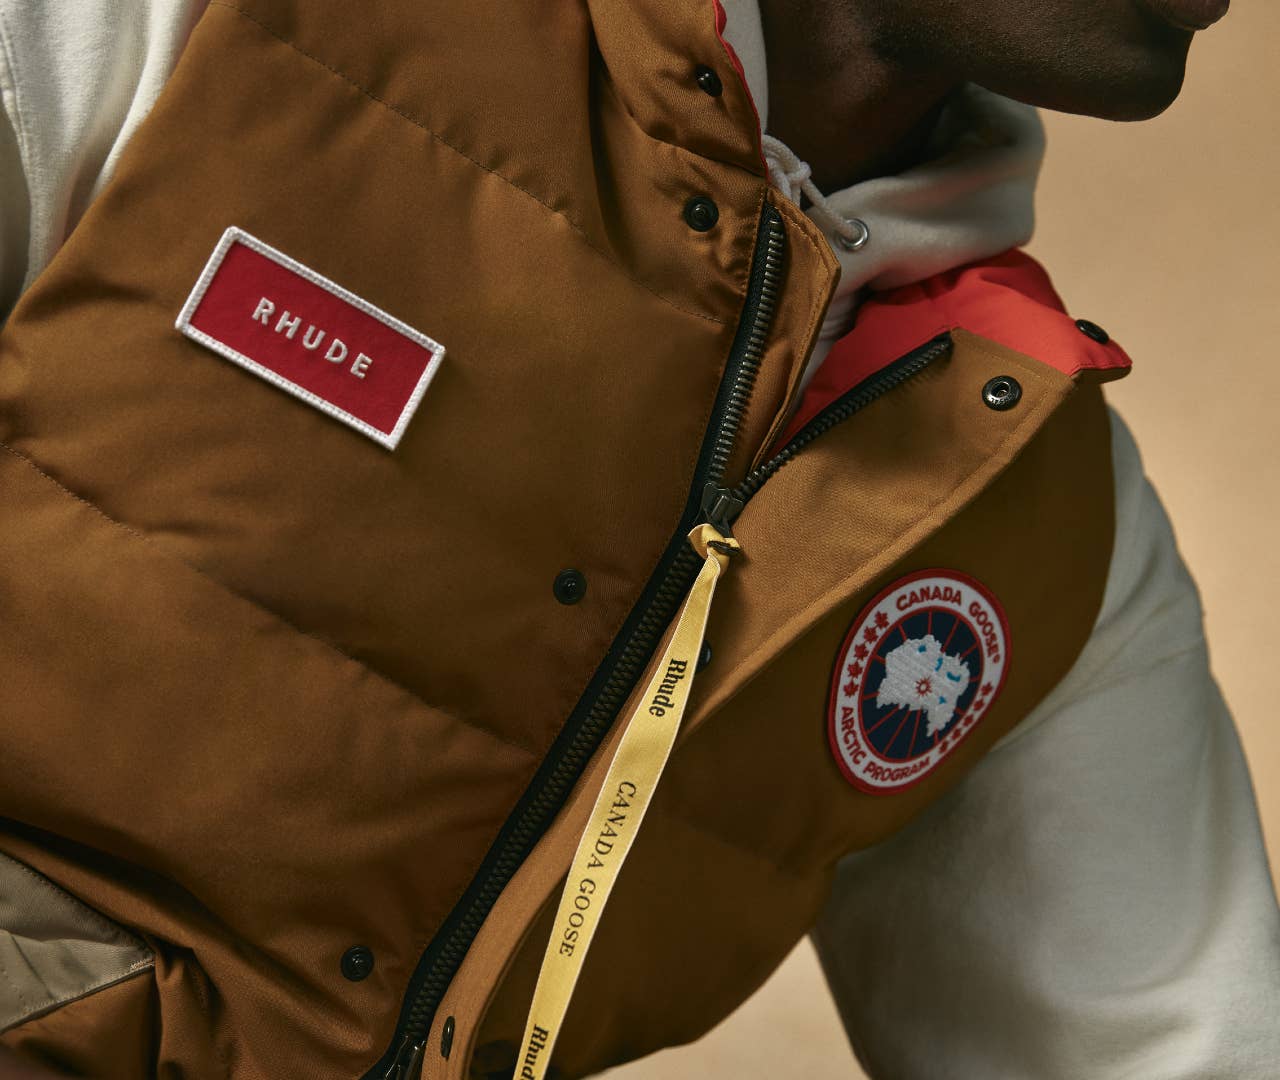 A brown vest worn by a model, with the Canada Goose and RHUDE logos visible